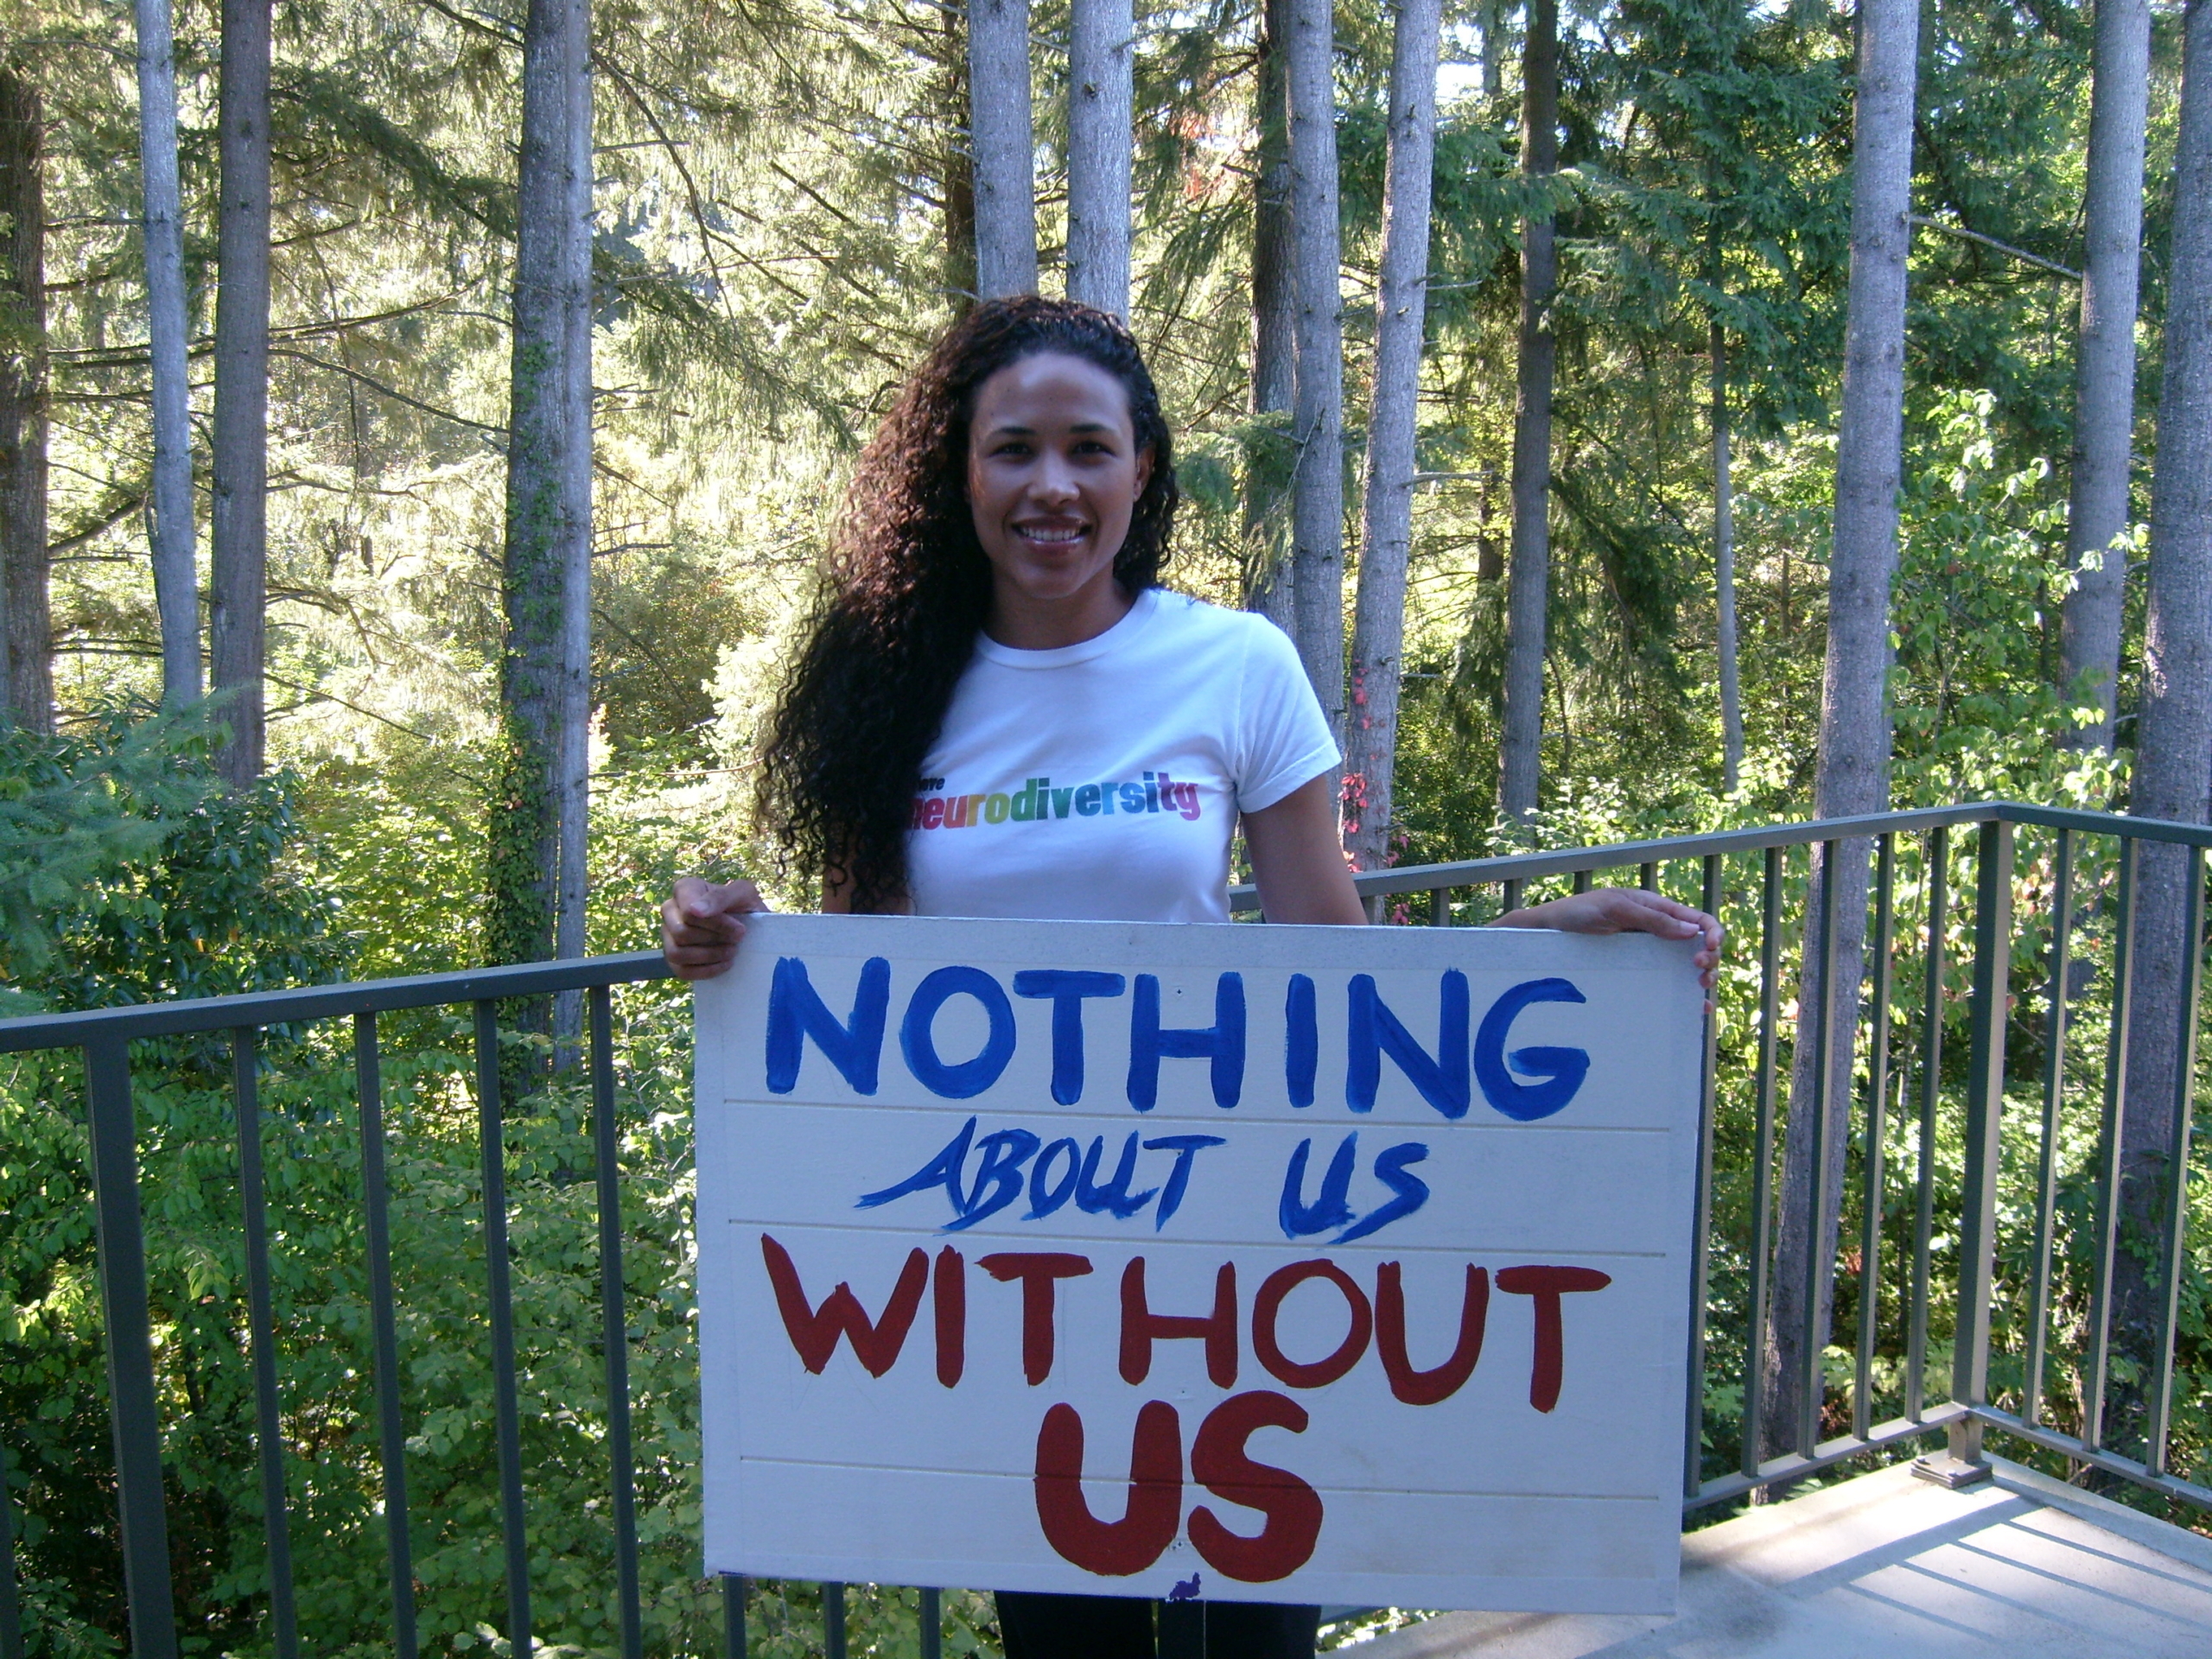 Young woman wearing a shirt that says Neurodiversity and holding a sign saying Nothing About Us Without Us